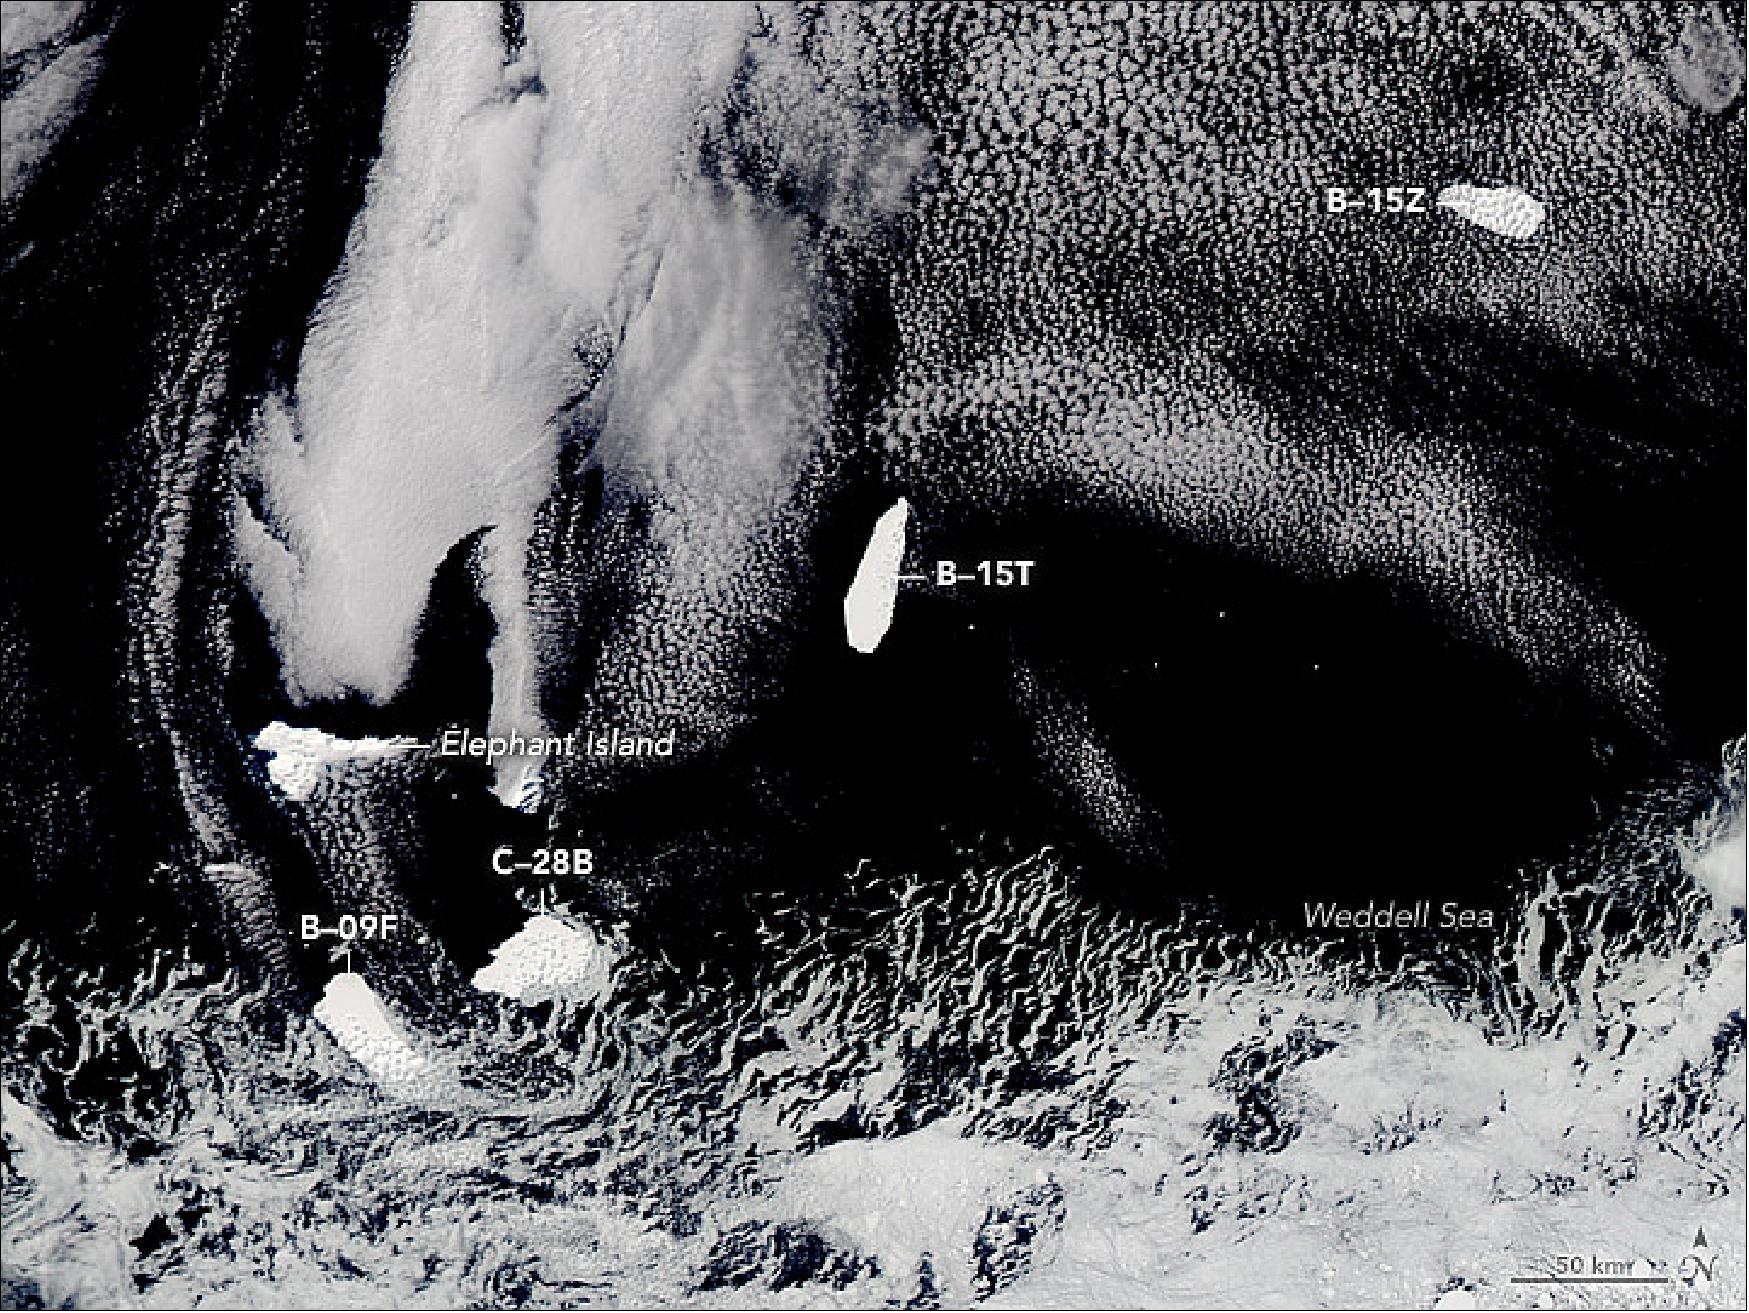 Figure 49: By late 2017, the Weddell Sea gyre had redirected B-15T from its near circumnavigation and sent the berg drifting north. This third image was acquired in October 2017 by MODIS on NASA’s Aqua satellite. It shows the iceberg when it was near Elephant Island, an icy bit of rock located a few hundred kilometers north-northeast from the tip of the Antarctic Peninsula (image credit: NASA Earth Observatory)